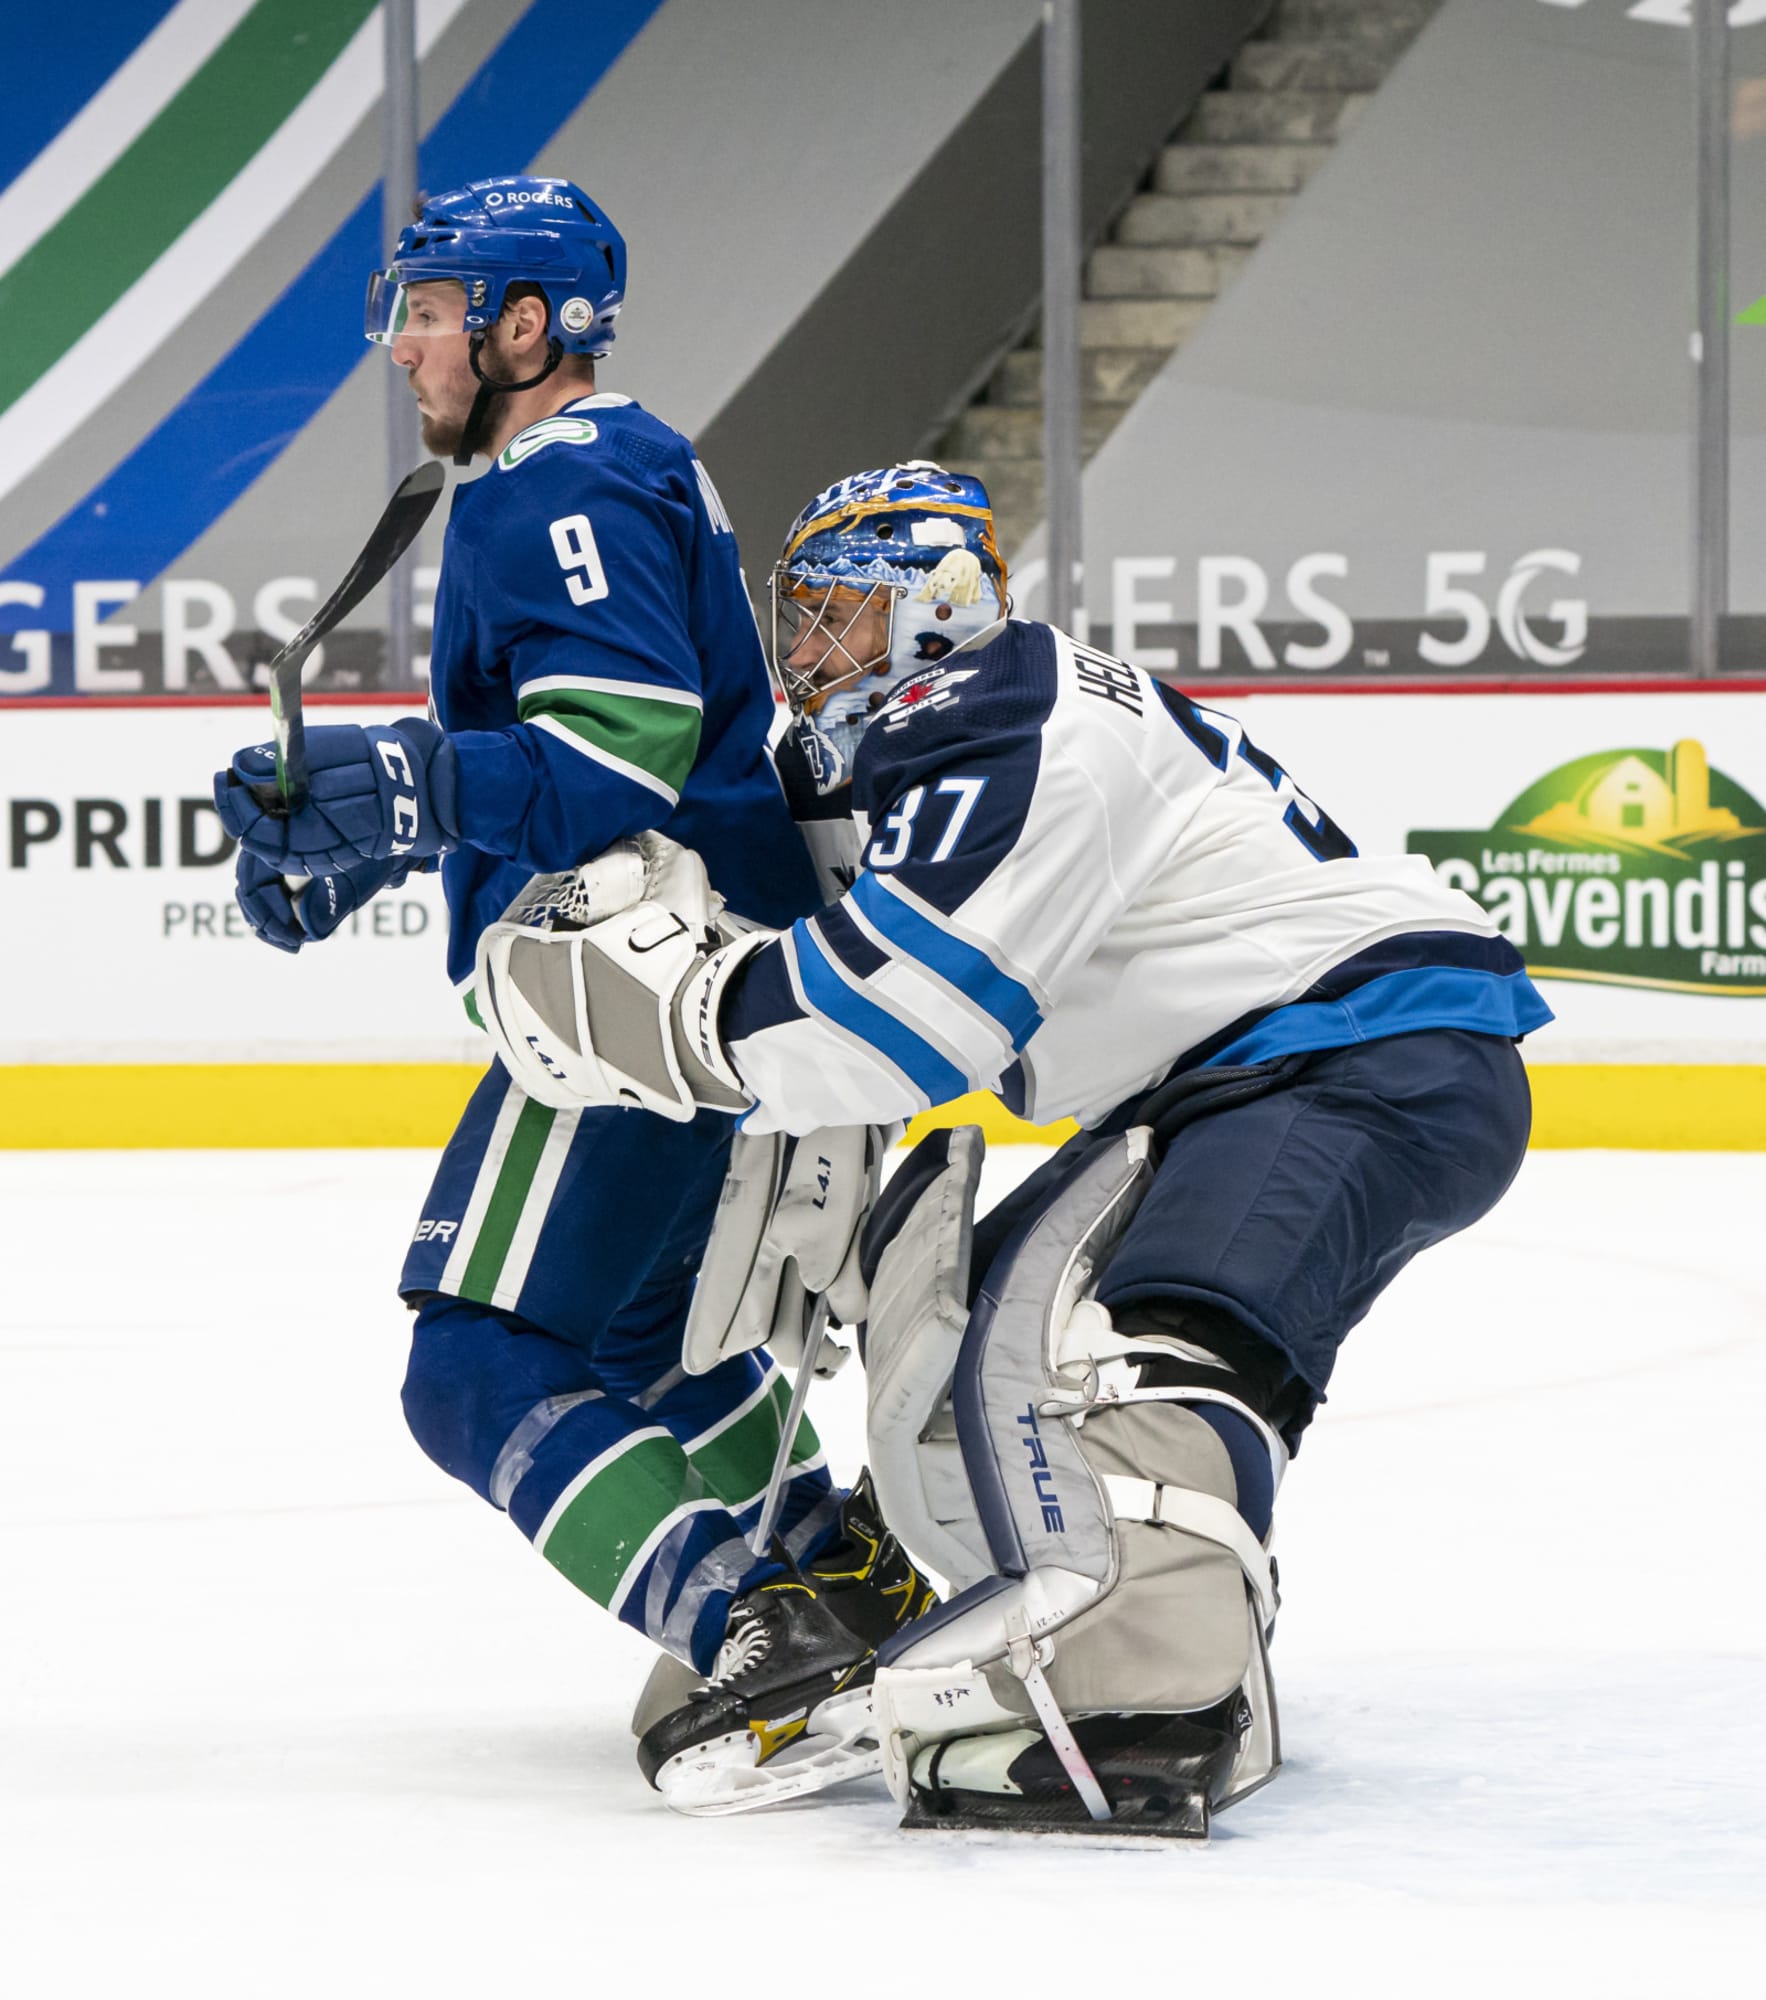 Canucks: 3 takeaways from the 5-0 loss to the Winnipeg Jets